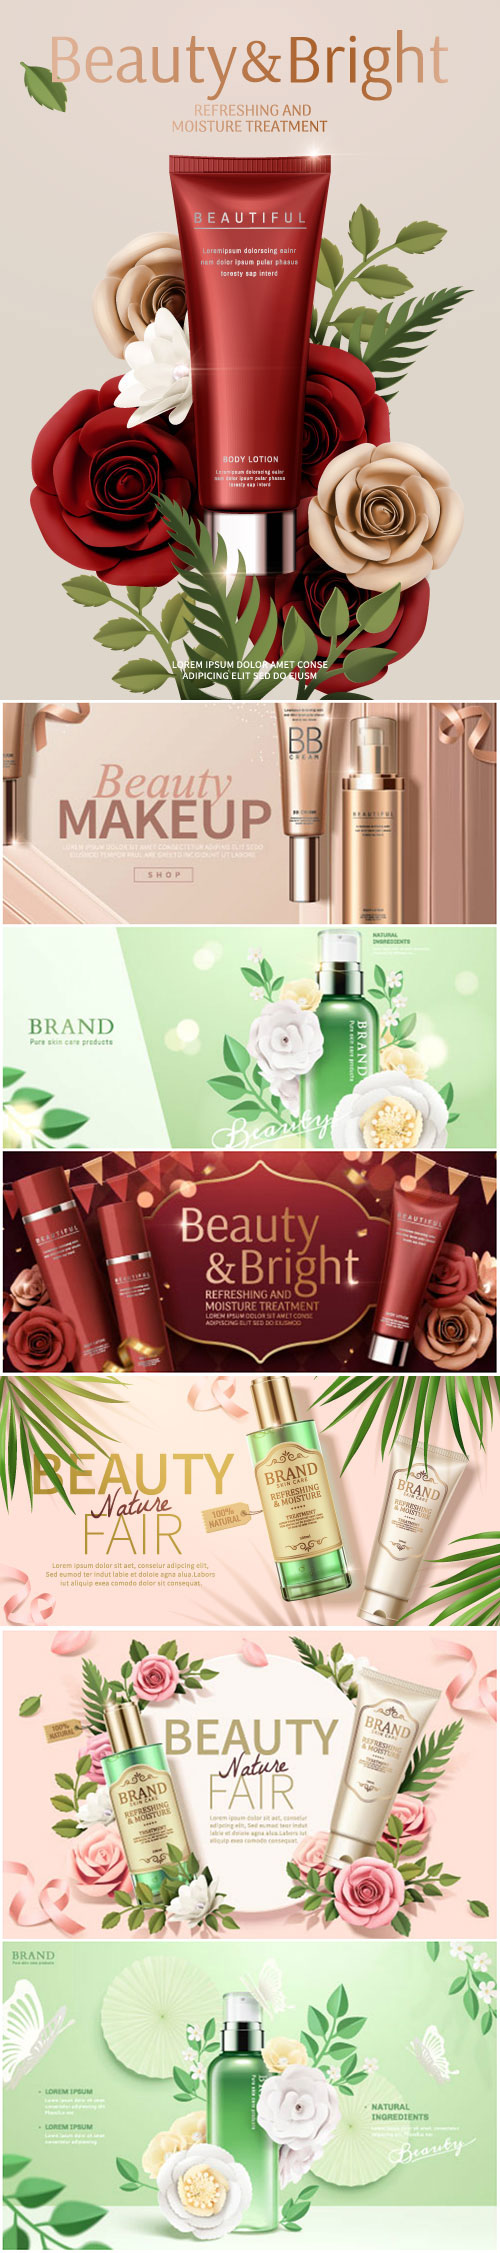 Brand cosmetic design, foundation banner ads # 4